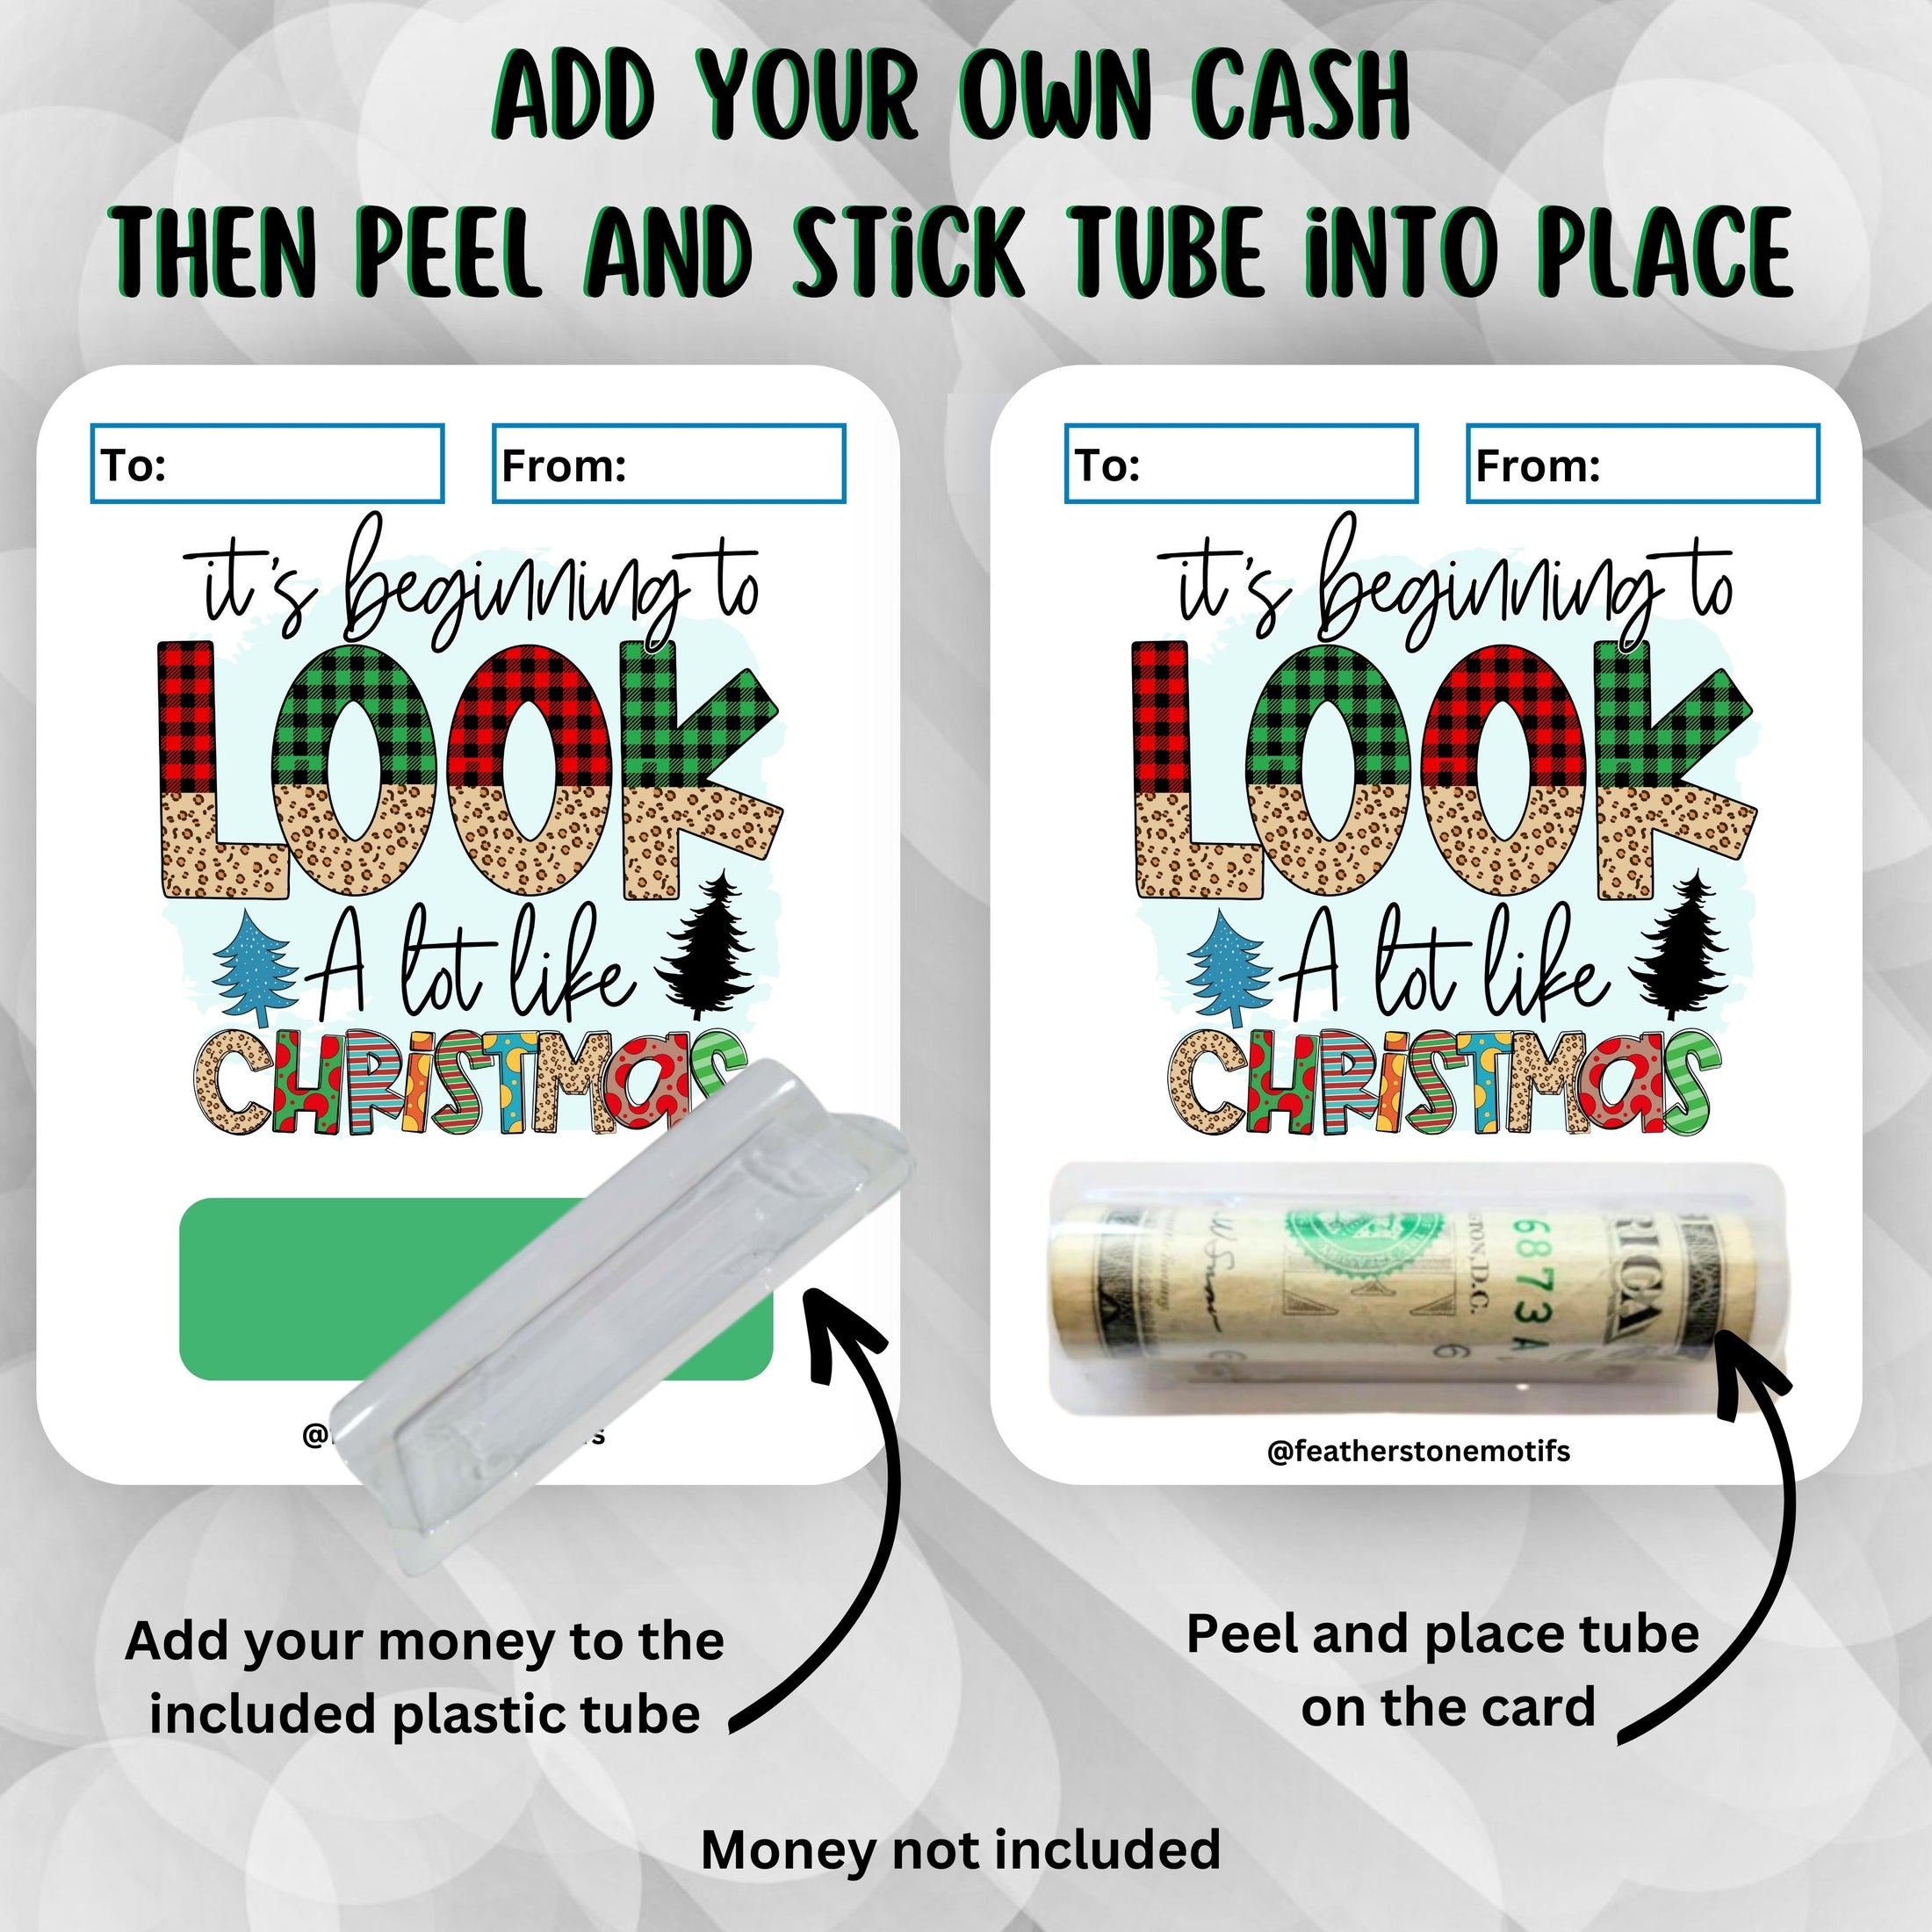 This image shows the how to attach the money tube to the Beginning to Look a lot Like Christmas Money Card.